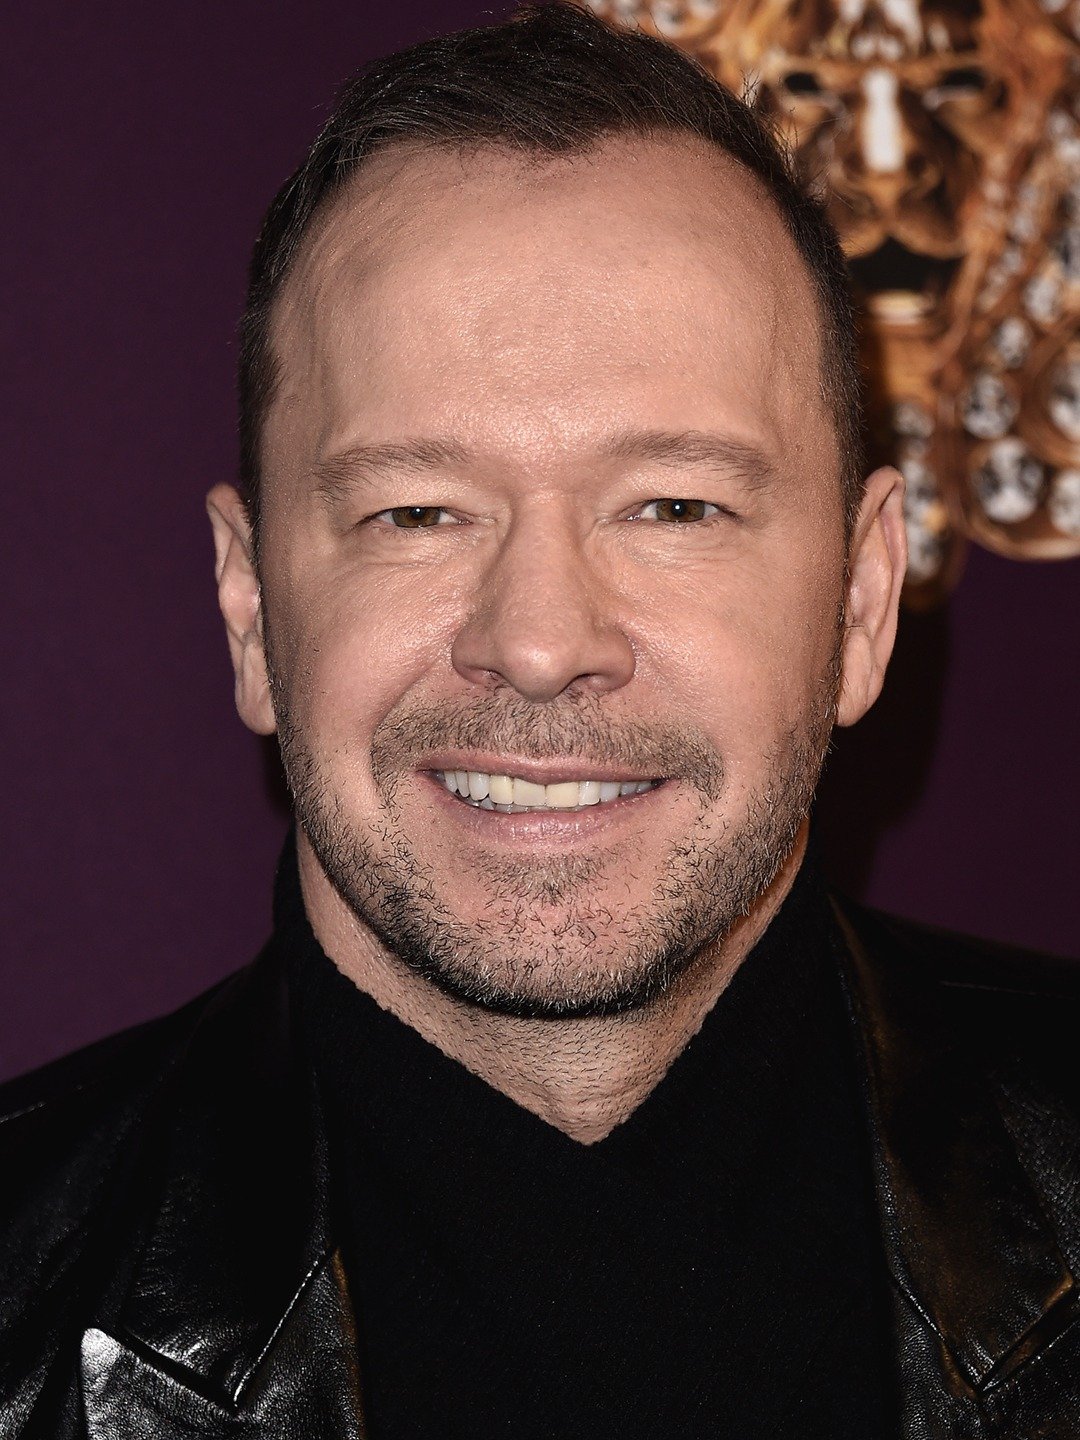 How tall is Donnie Wahlberg?